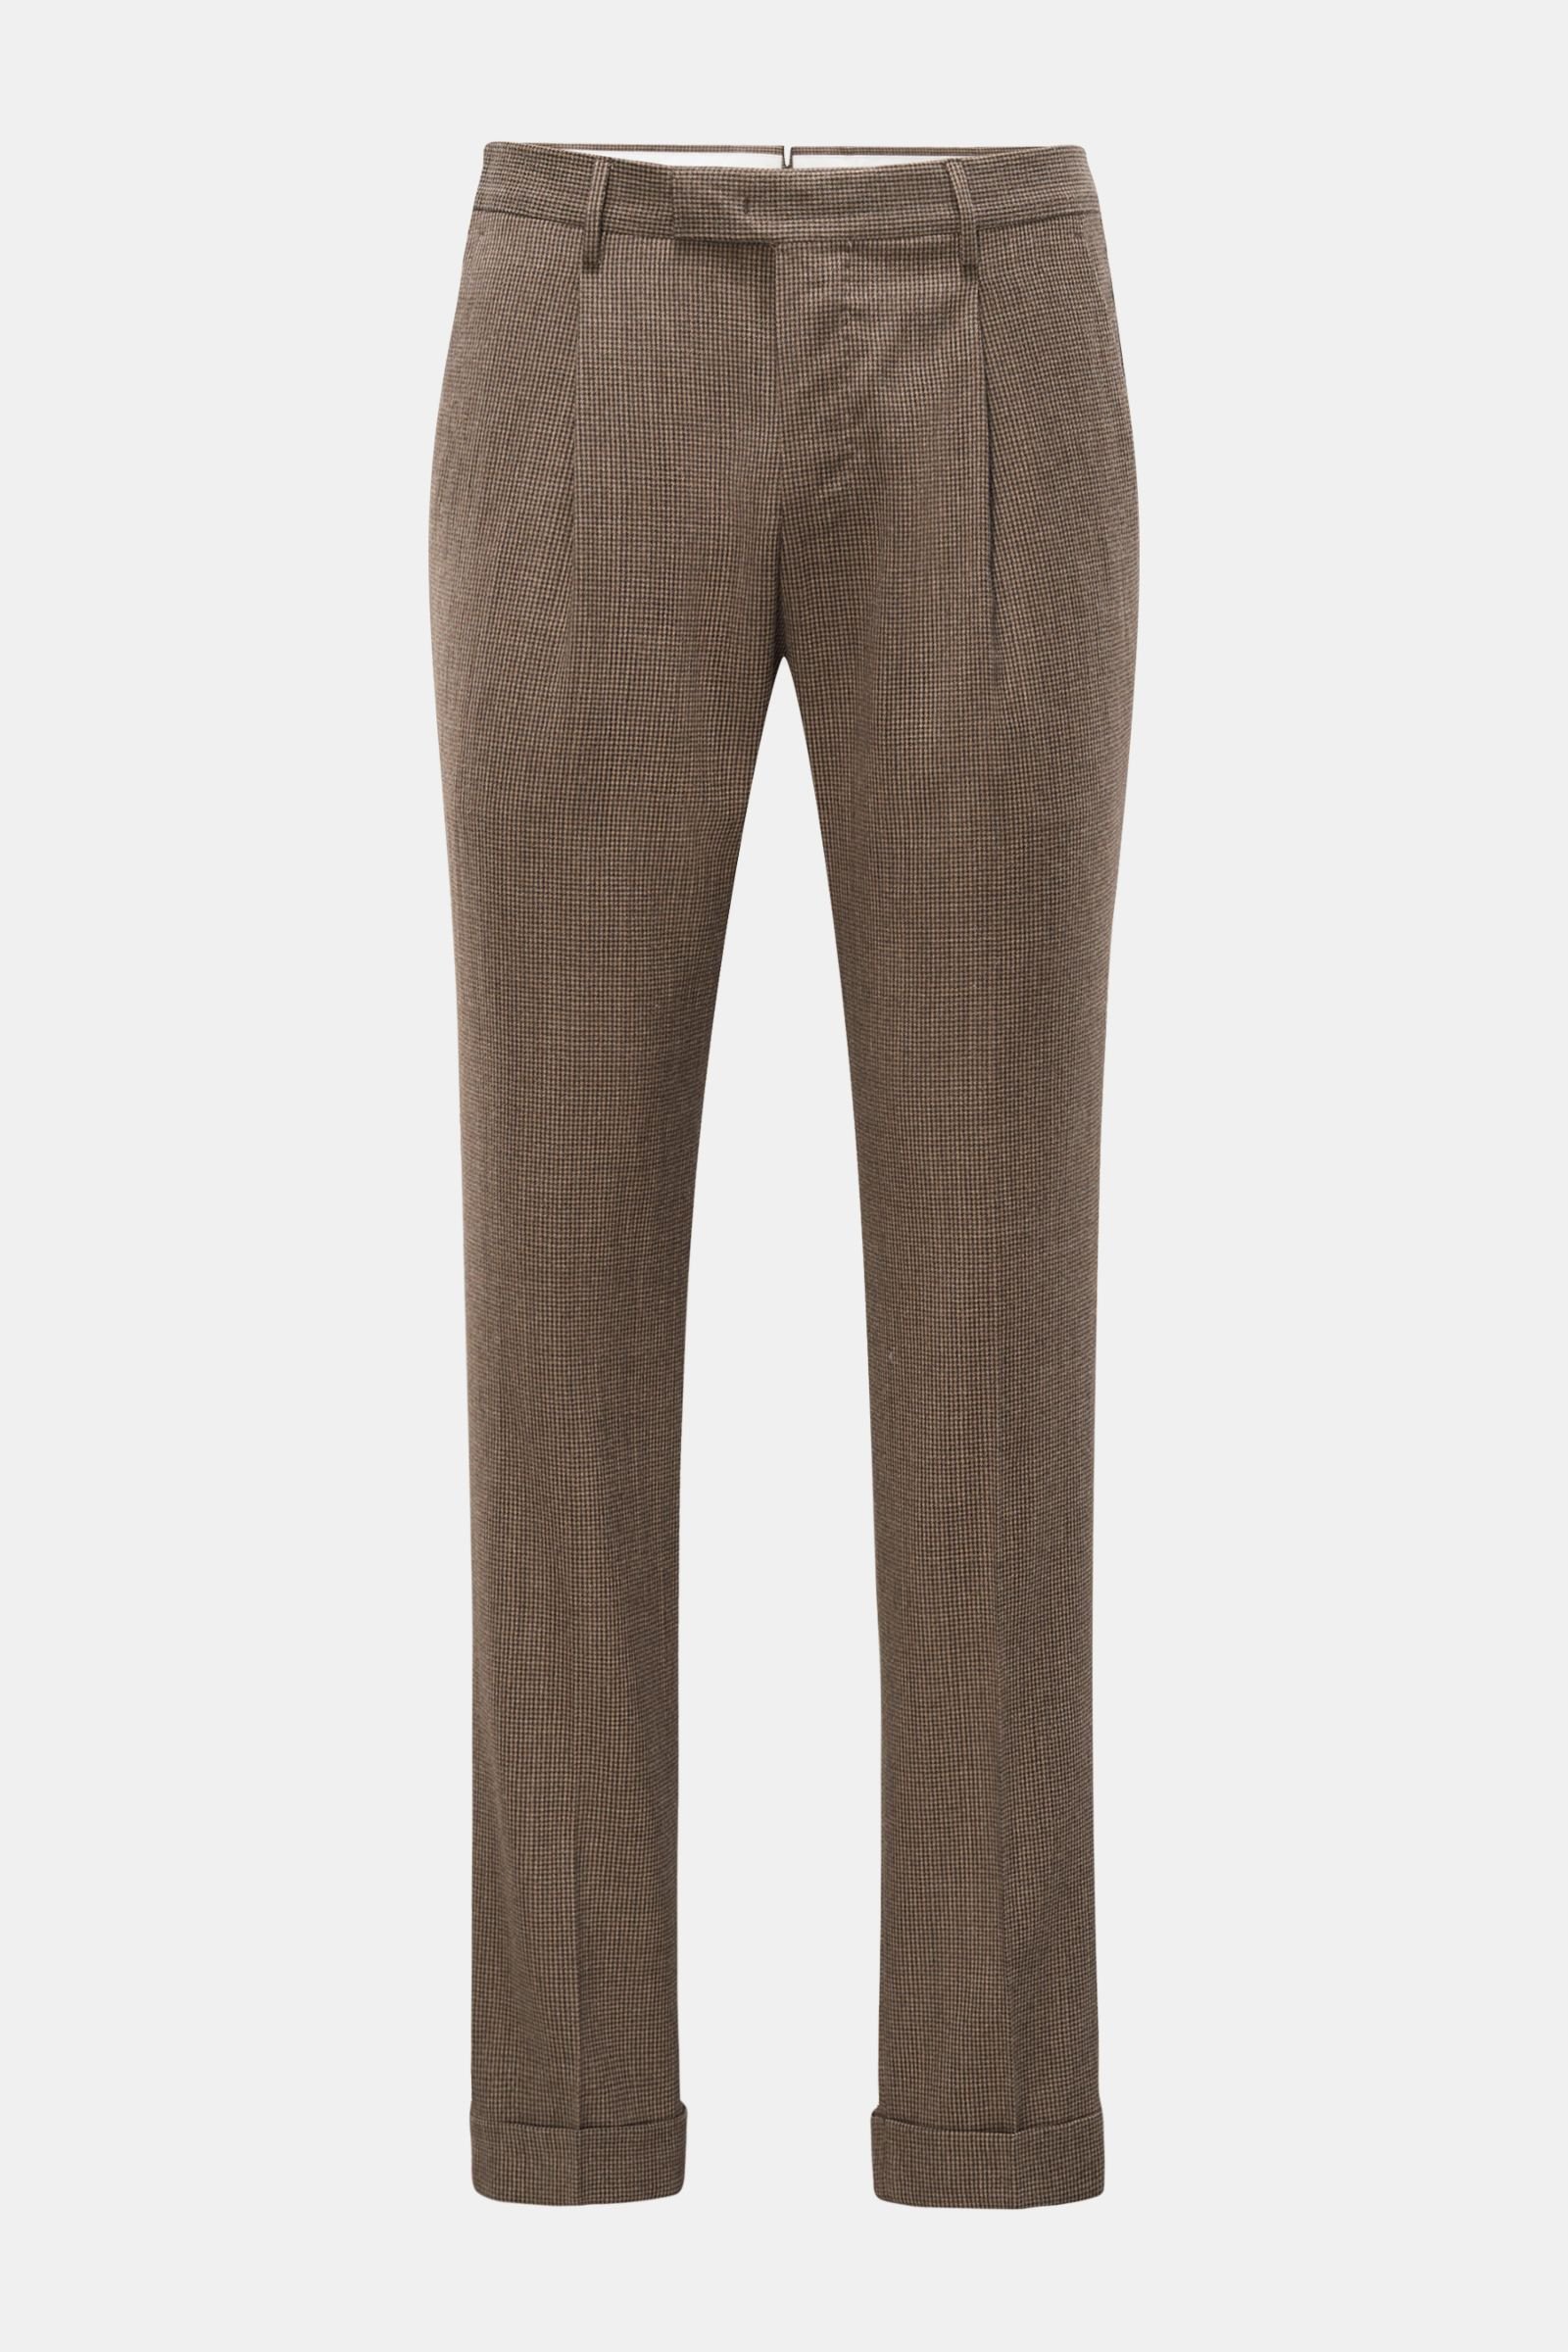 Wool trousers beige/brown checked